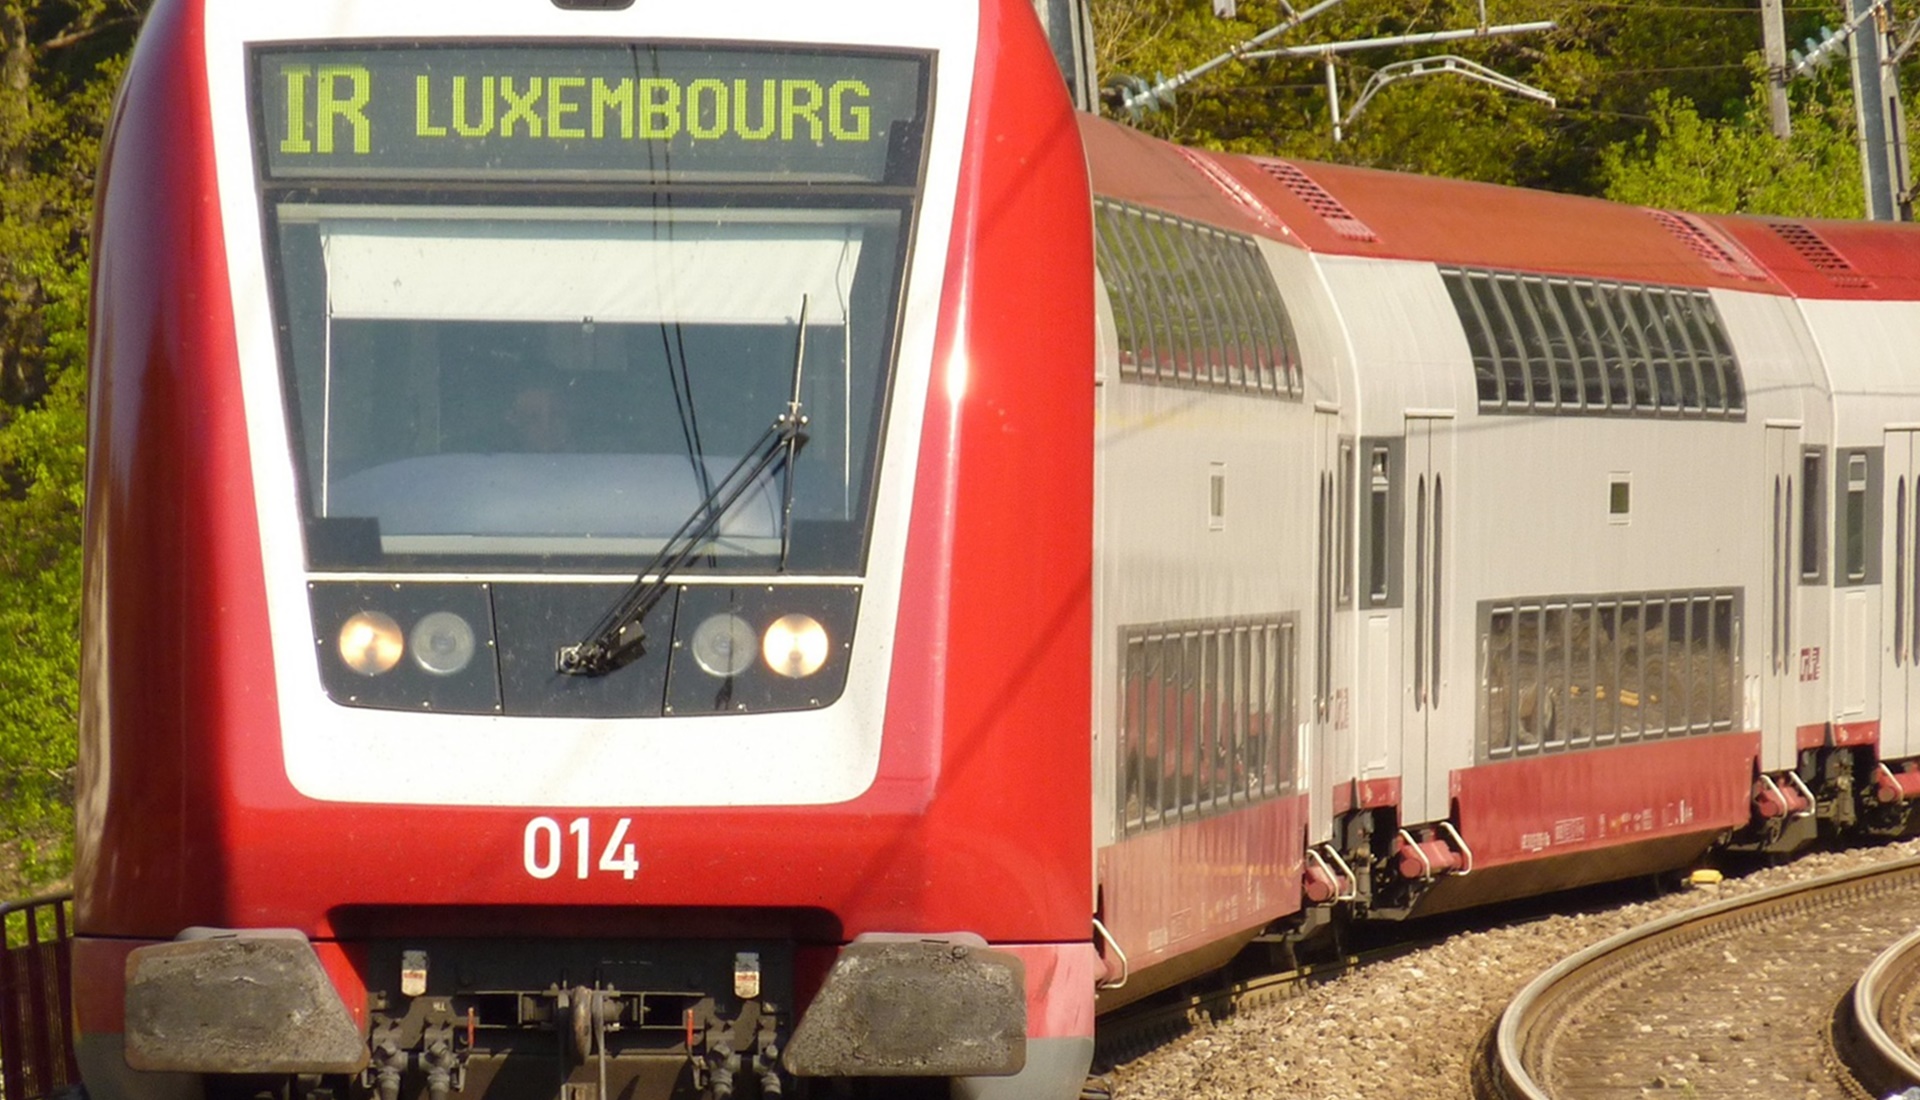 Free public transport in Luxembourg?